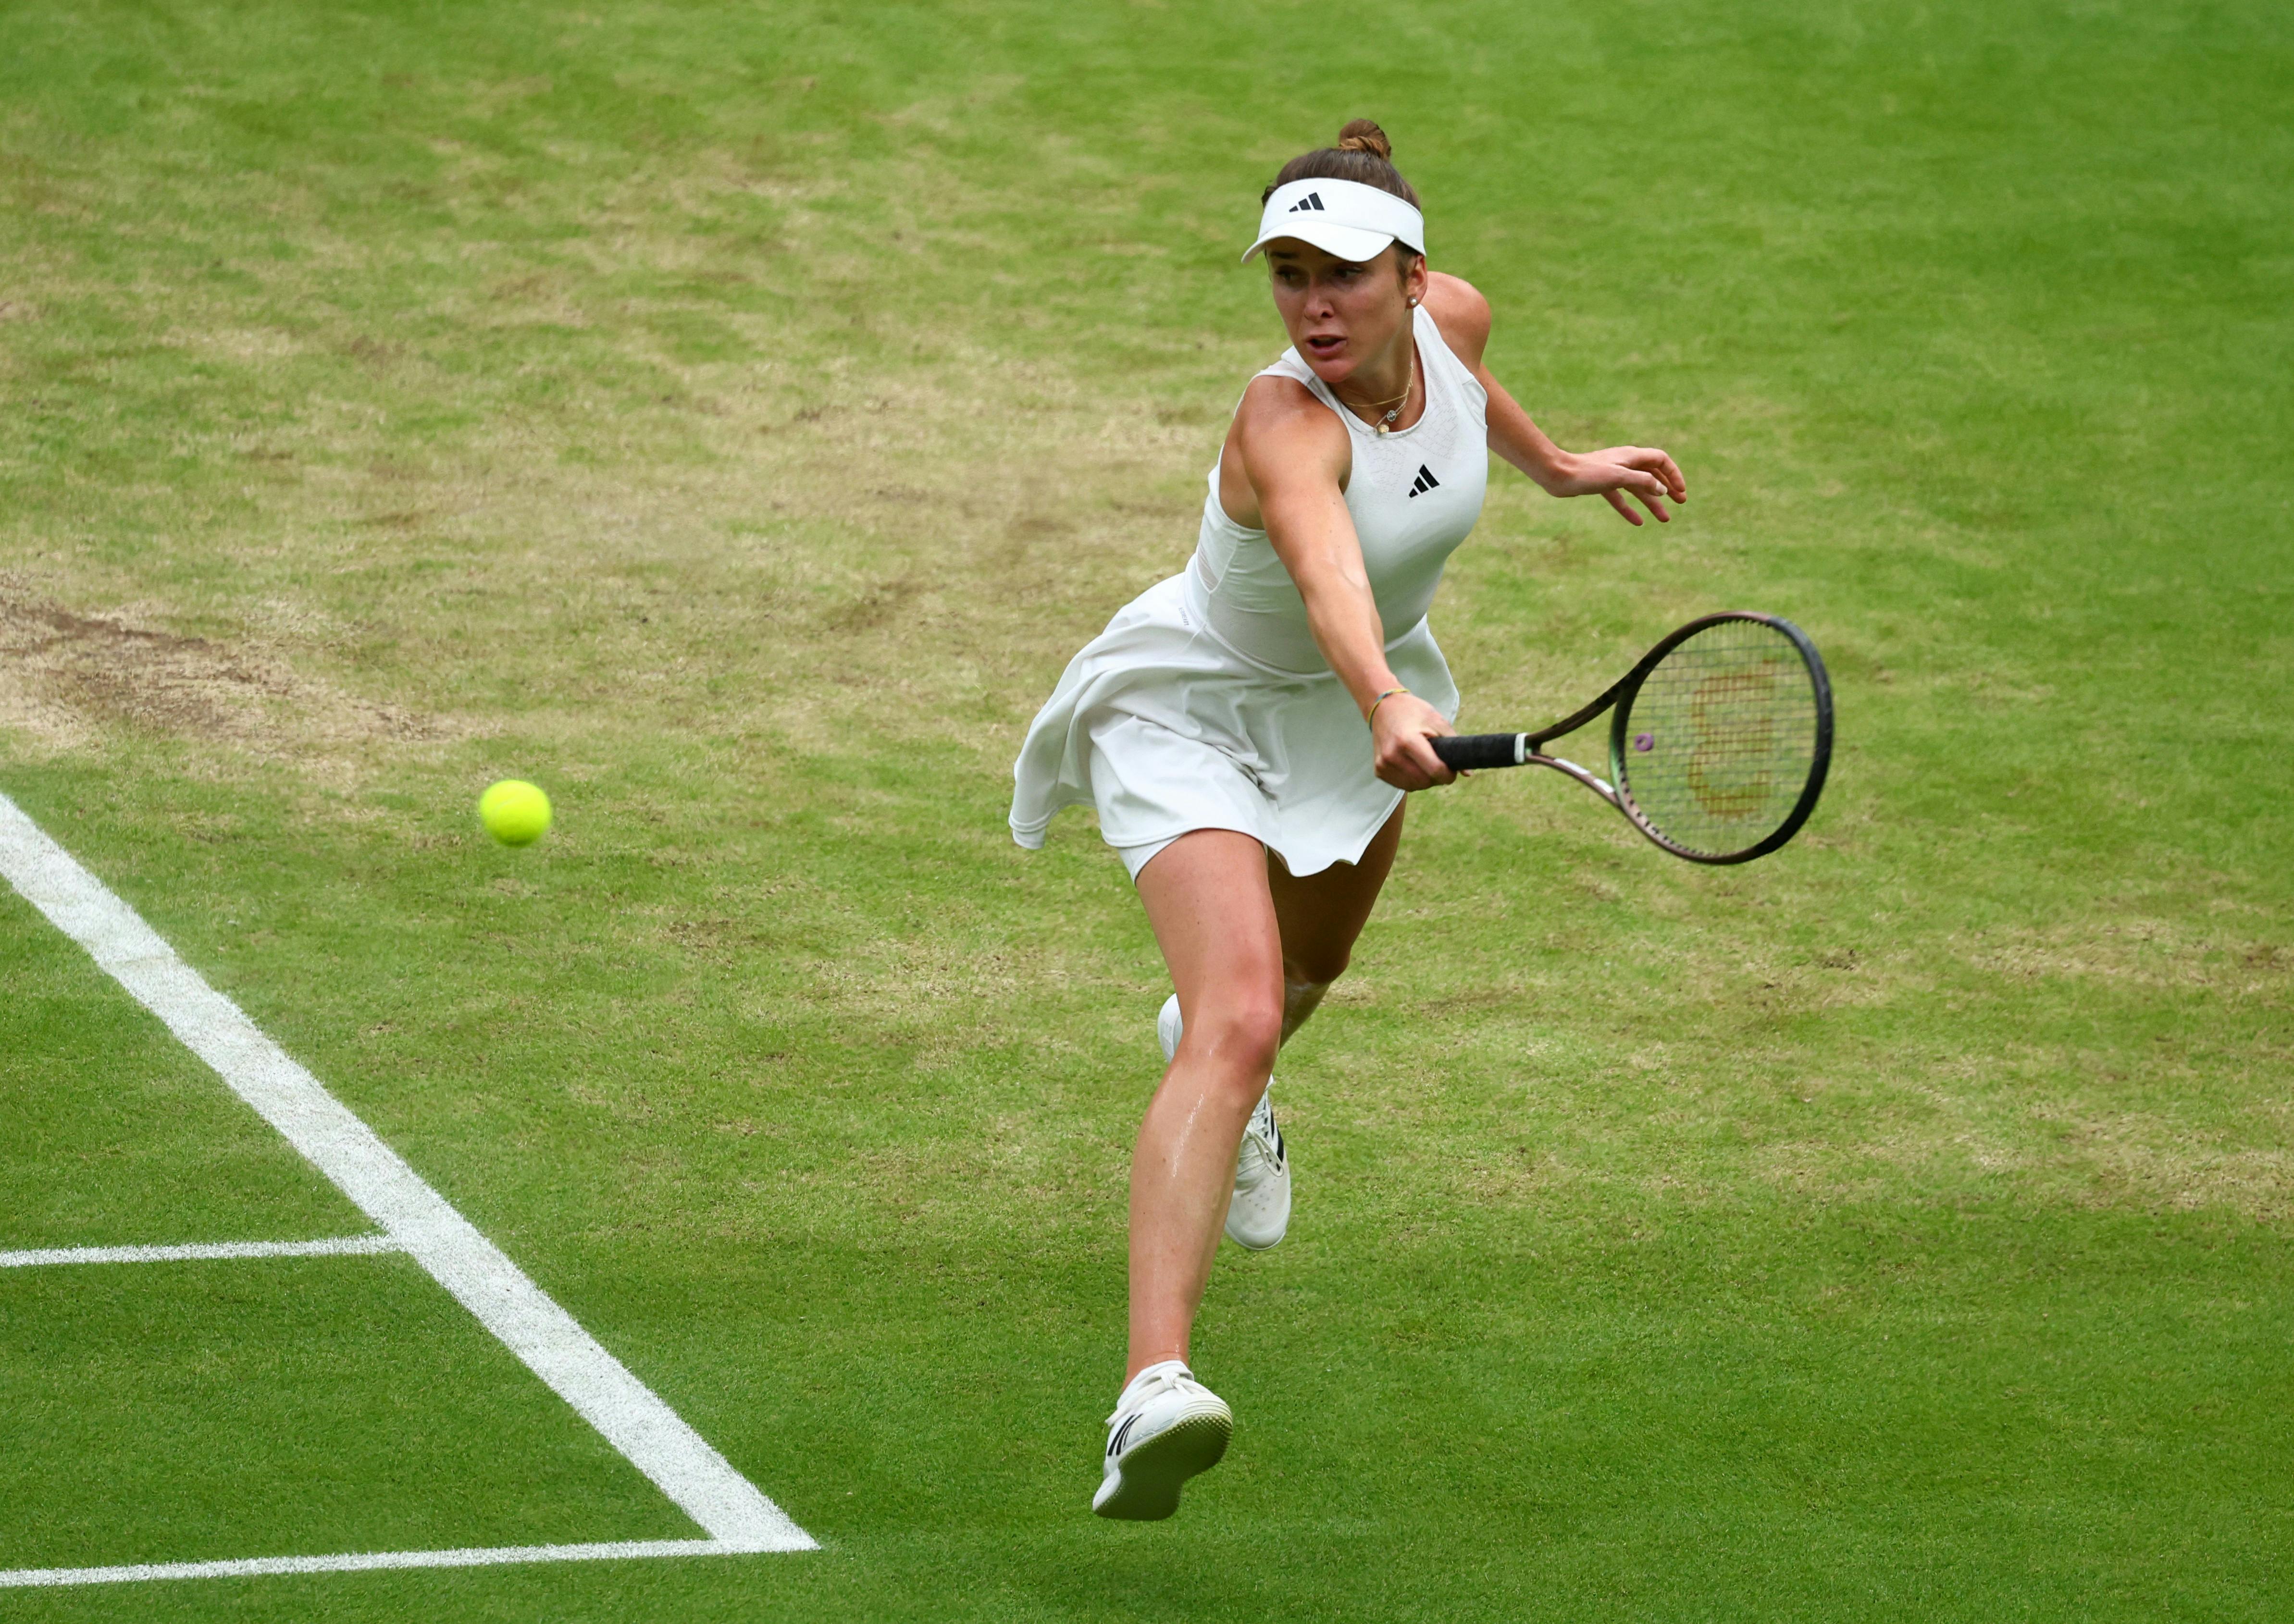 Tennis-Jabeur ready for latest shot at Wimbledon glory with Vondrousova in her way SaltWire